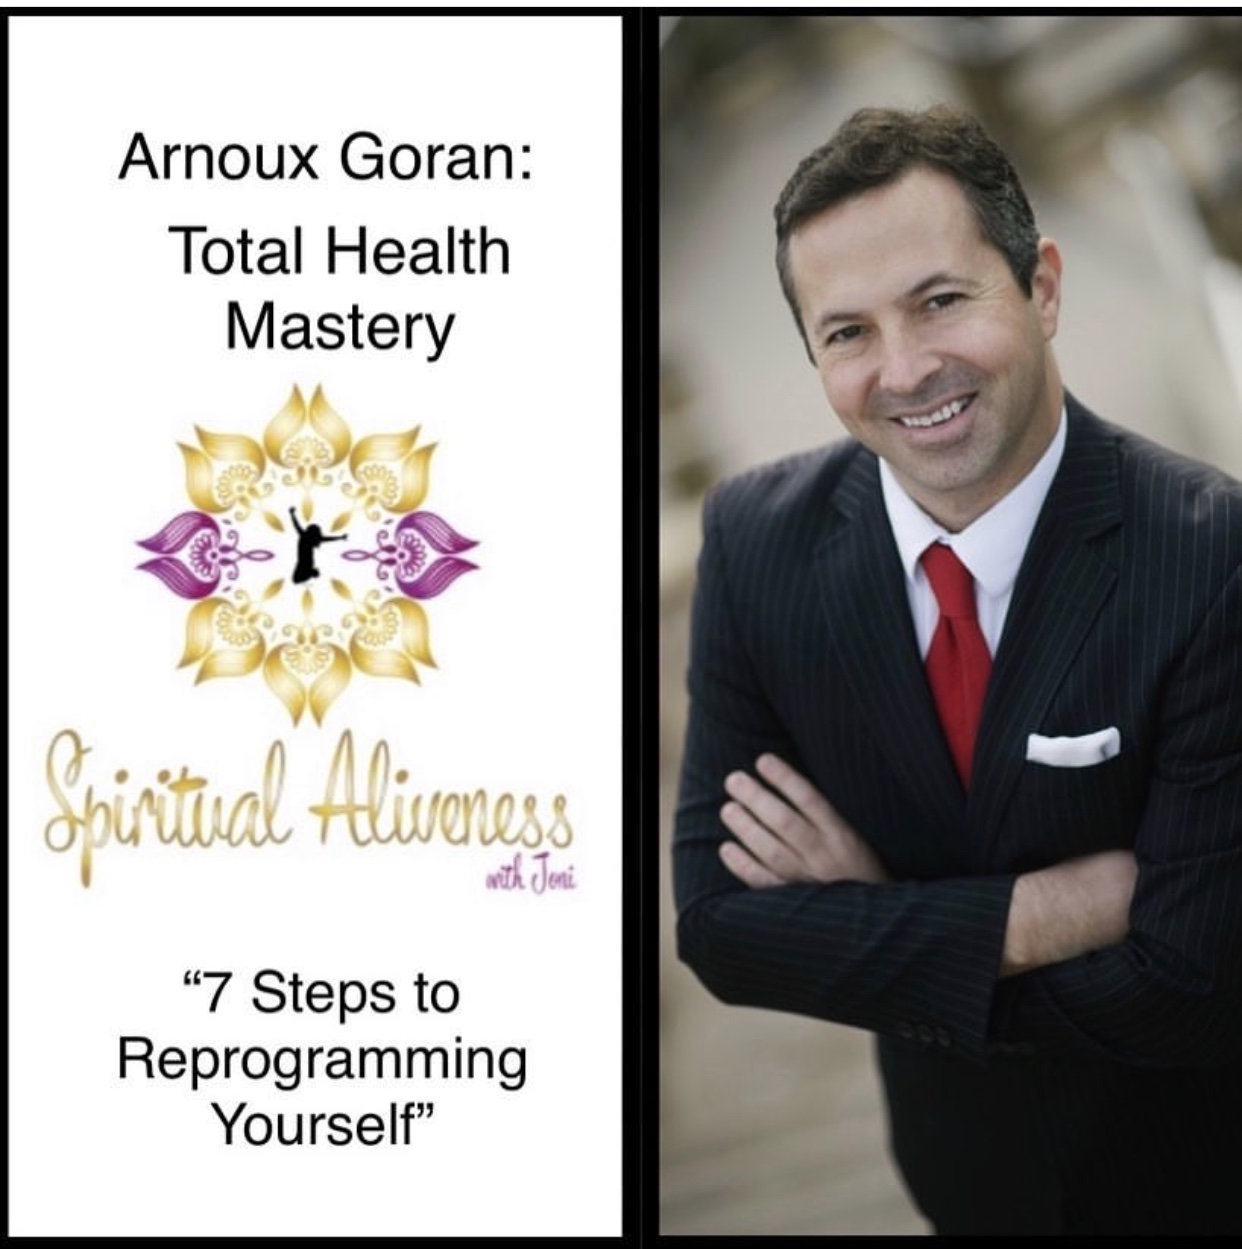 Read more about the article Arnoux Goran: Total Health Mastery in All Areas of Life, How to Reprogram your Life for Success and Happiness, Coming from Nothing and Creating an Abundant, Purposeful Life